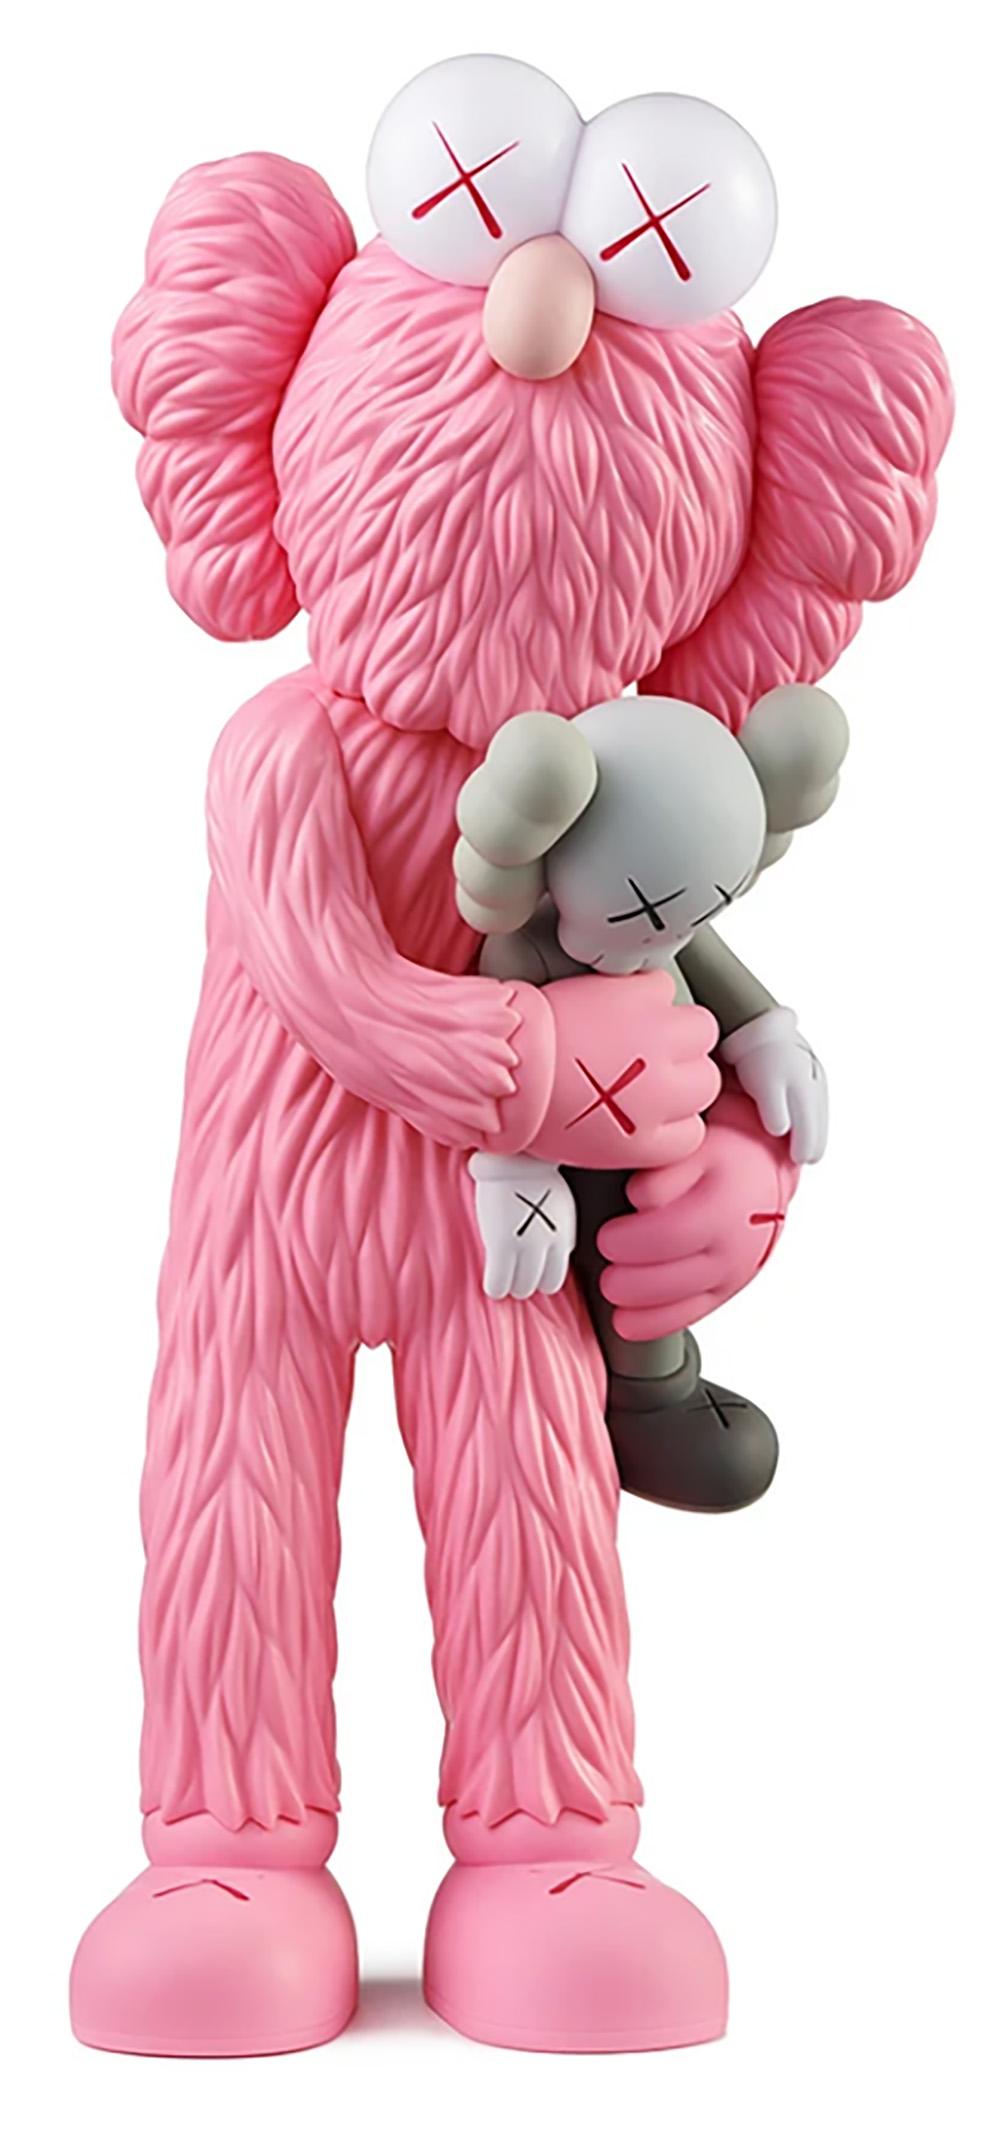 KAWS TAKE:
Complete set of 3 KAWS TAKE Companions new & unopened in original packaging. 
A well-received KAWS figurative piece & variation of KAWS' large scale TAKE sculpture - a key highlight of the exhibition, 'KAWS BLACKOUT at Skarstedt Gallery